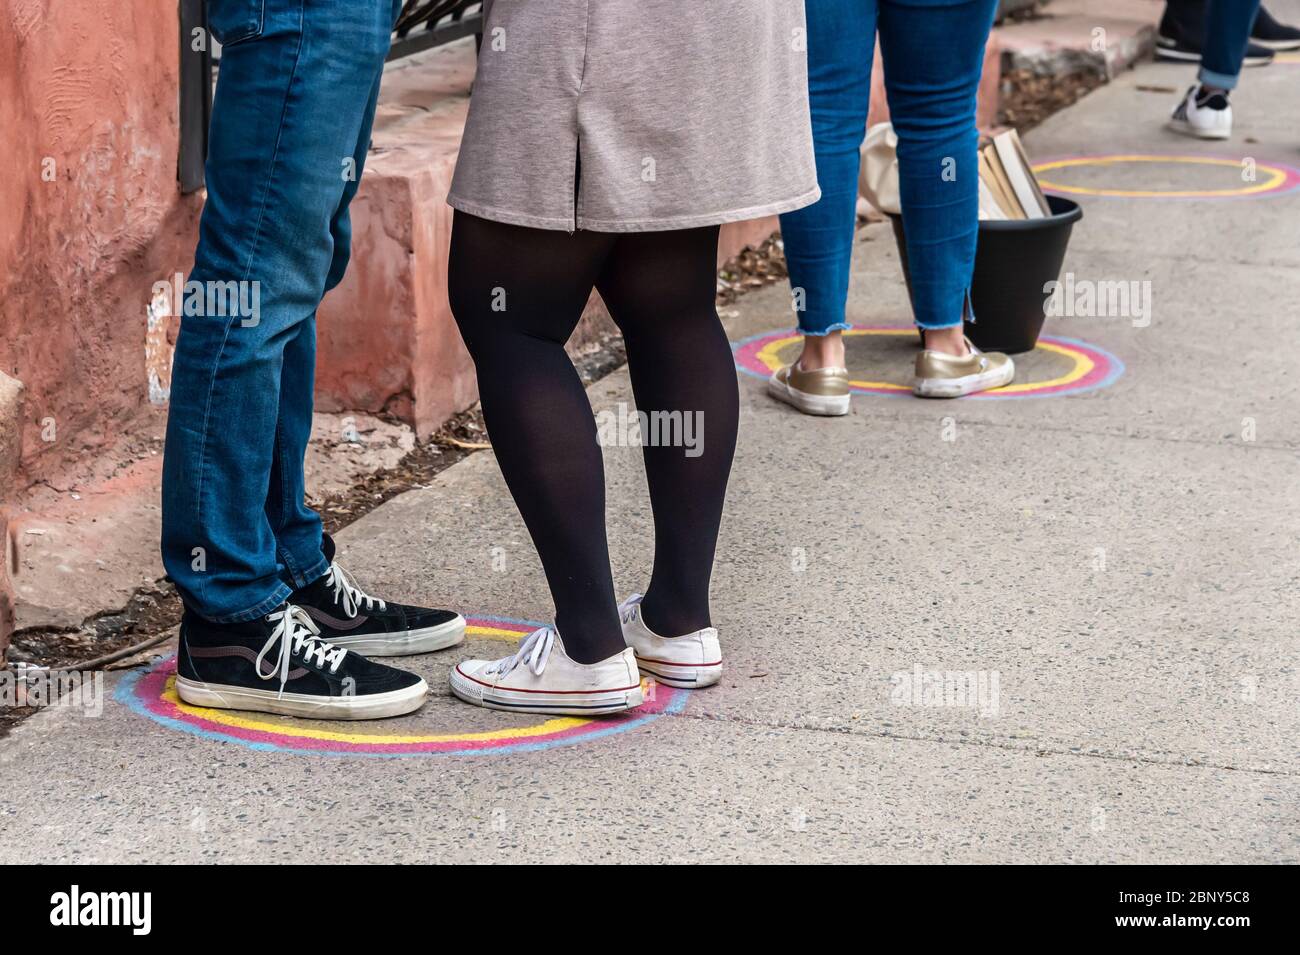 Customers line up at safe distance in front of a store, helped by marks painted on the ground, during coronavirus pandemic Stock Photo